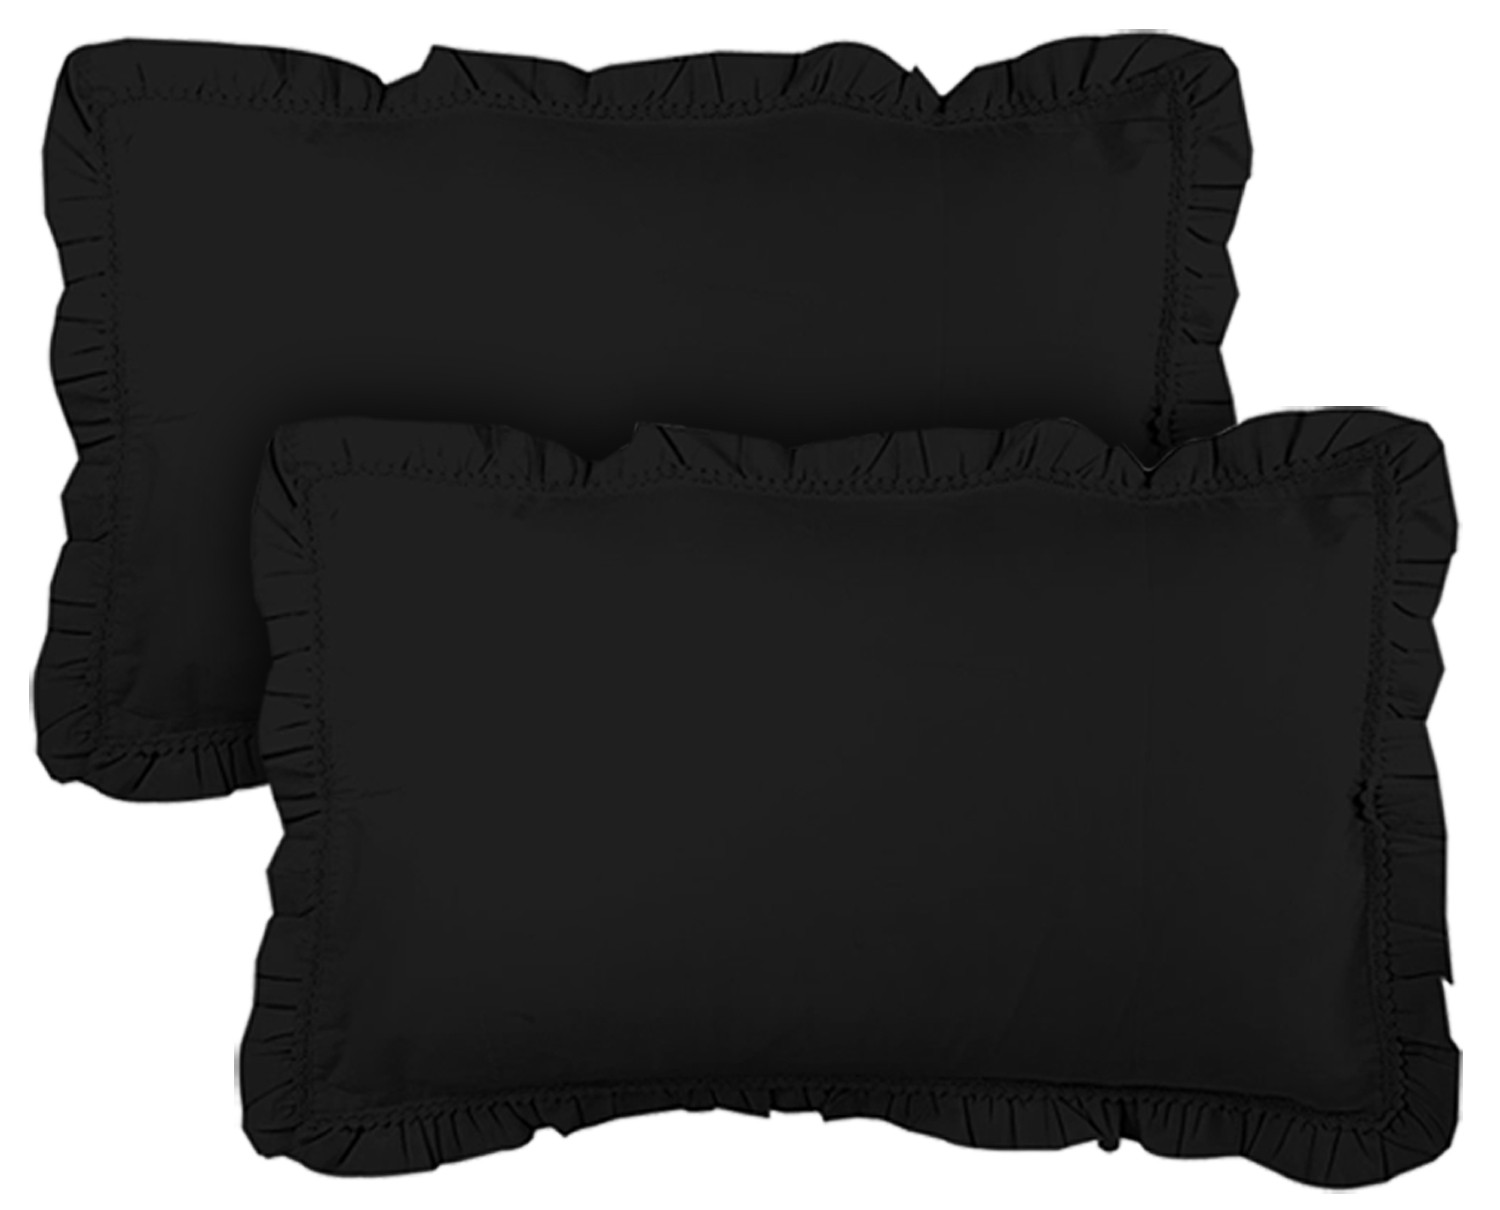 Kuber Industries Cotton Pillow Cover Set-18